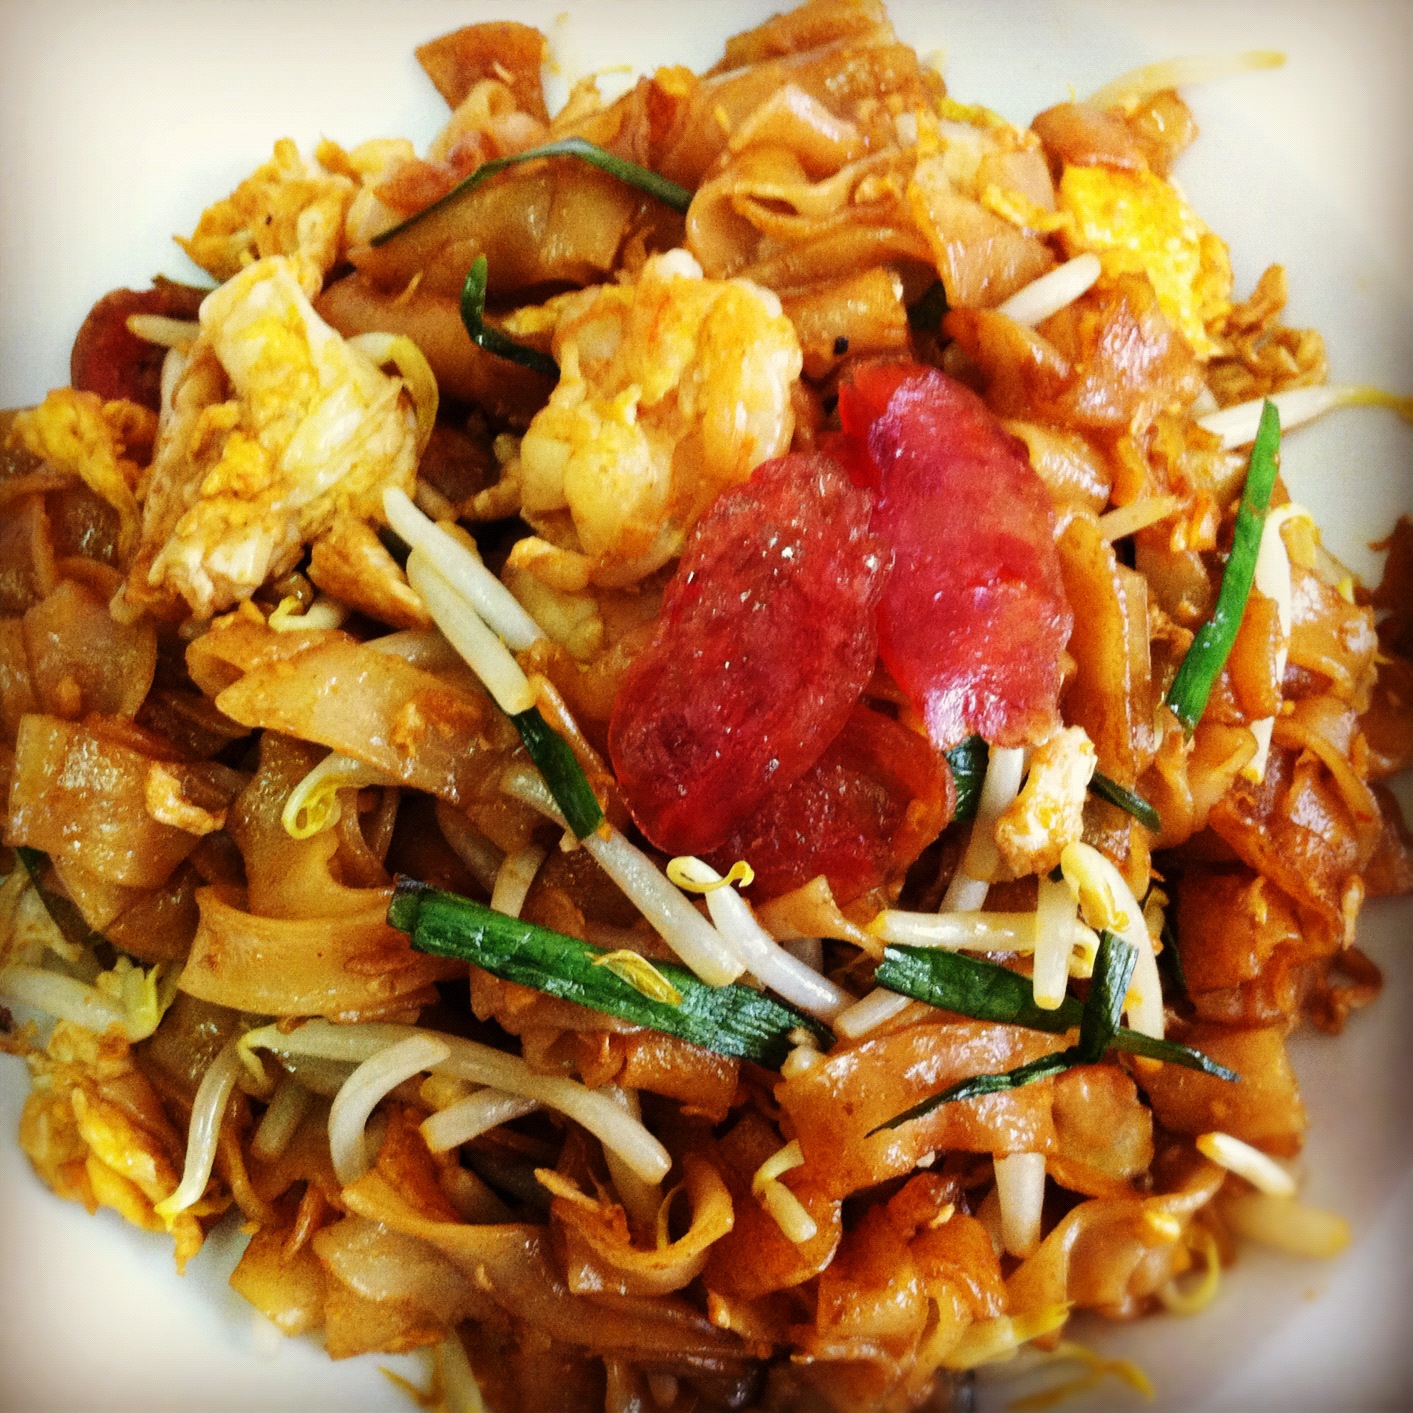 Confessions of a Weekend Cook: Penang Char Kuey Teow